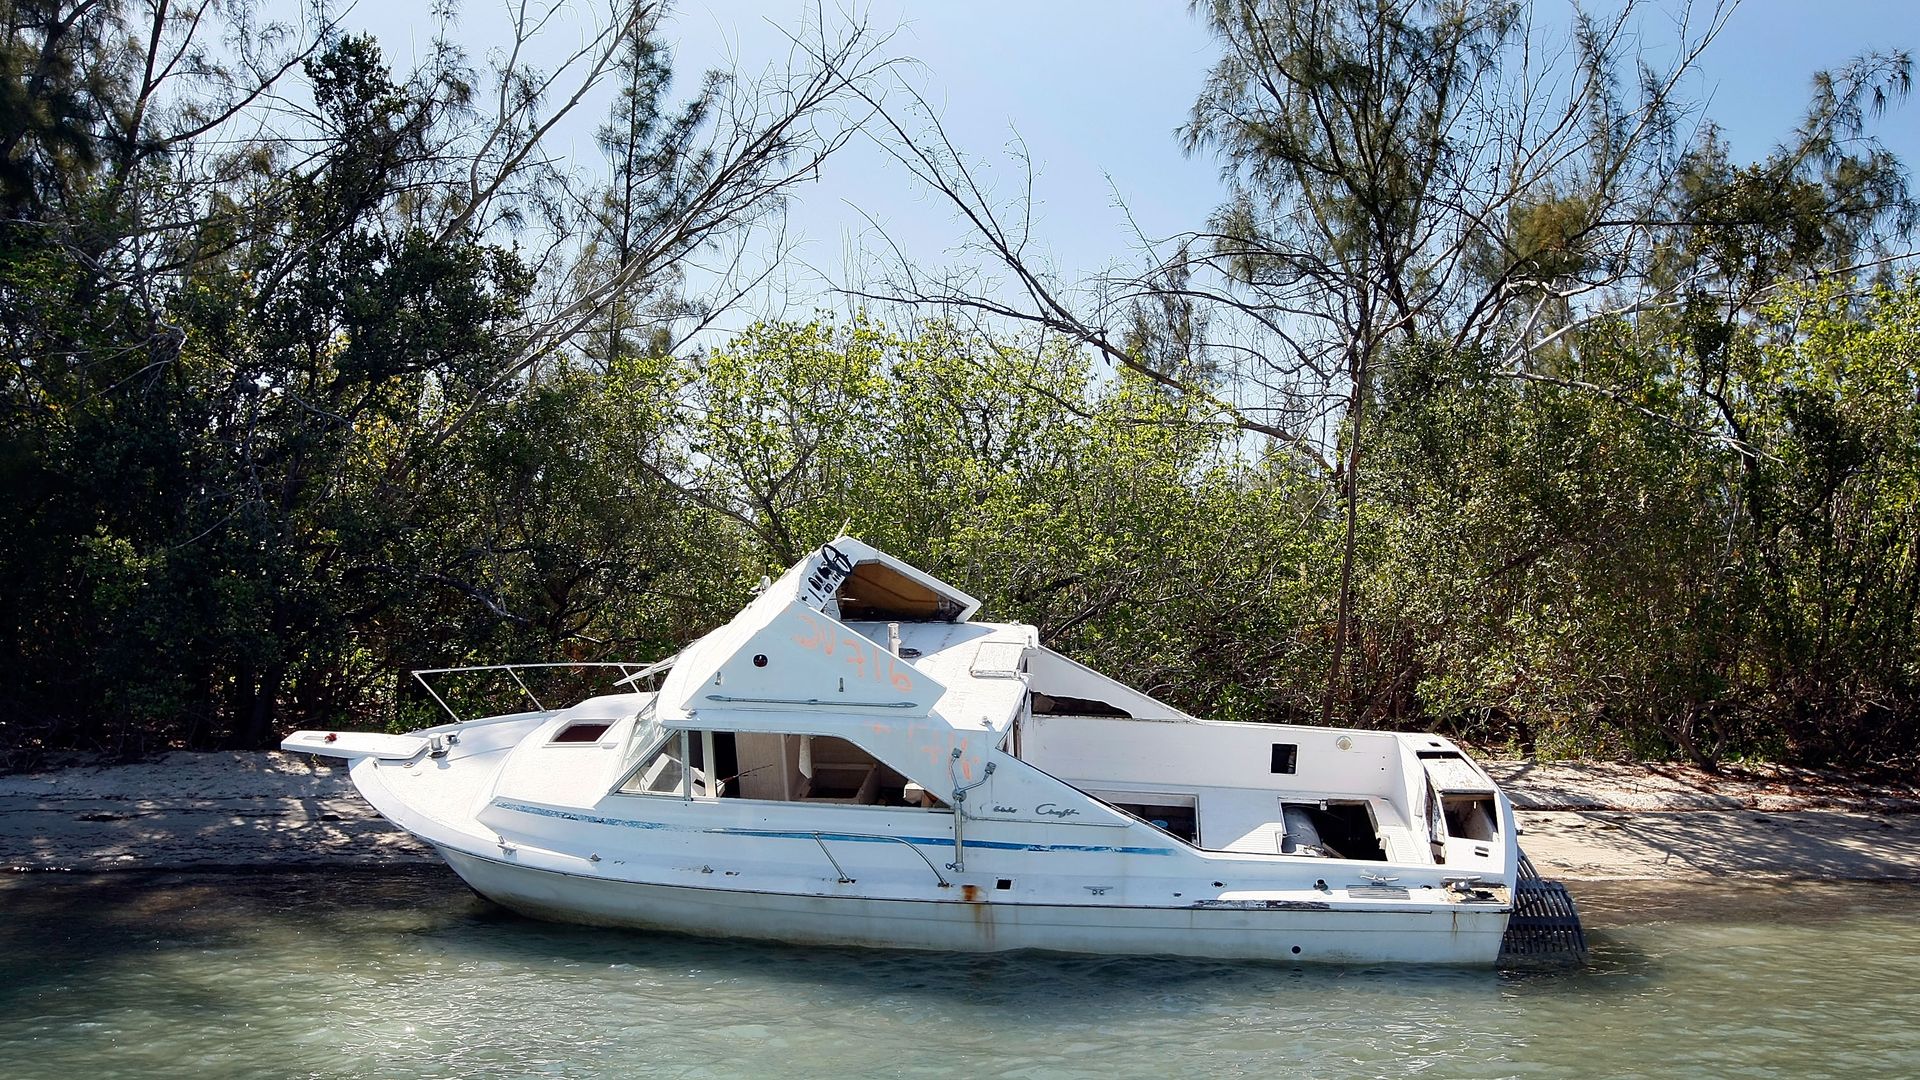 A derelict boat washed up on shore in Miami. 